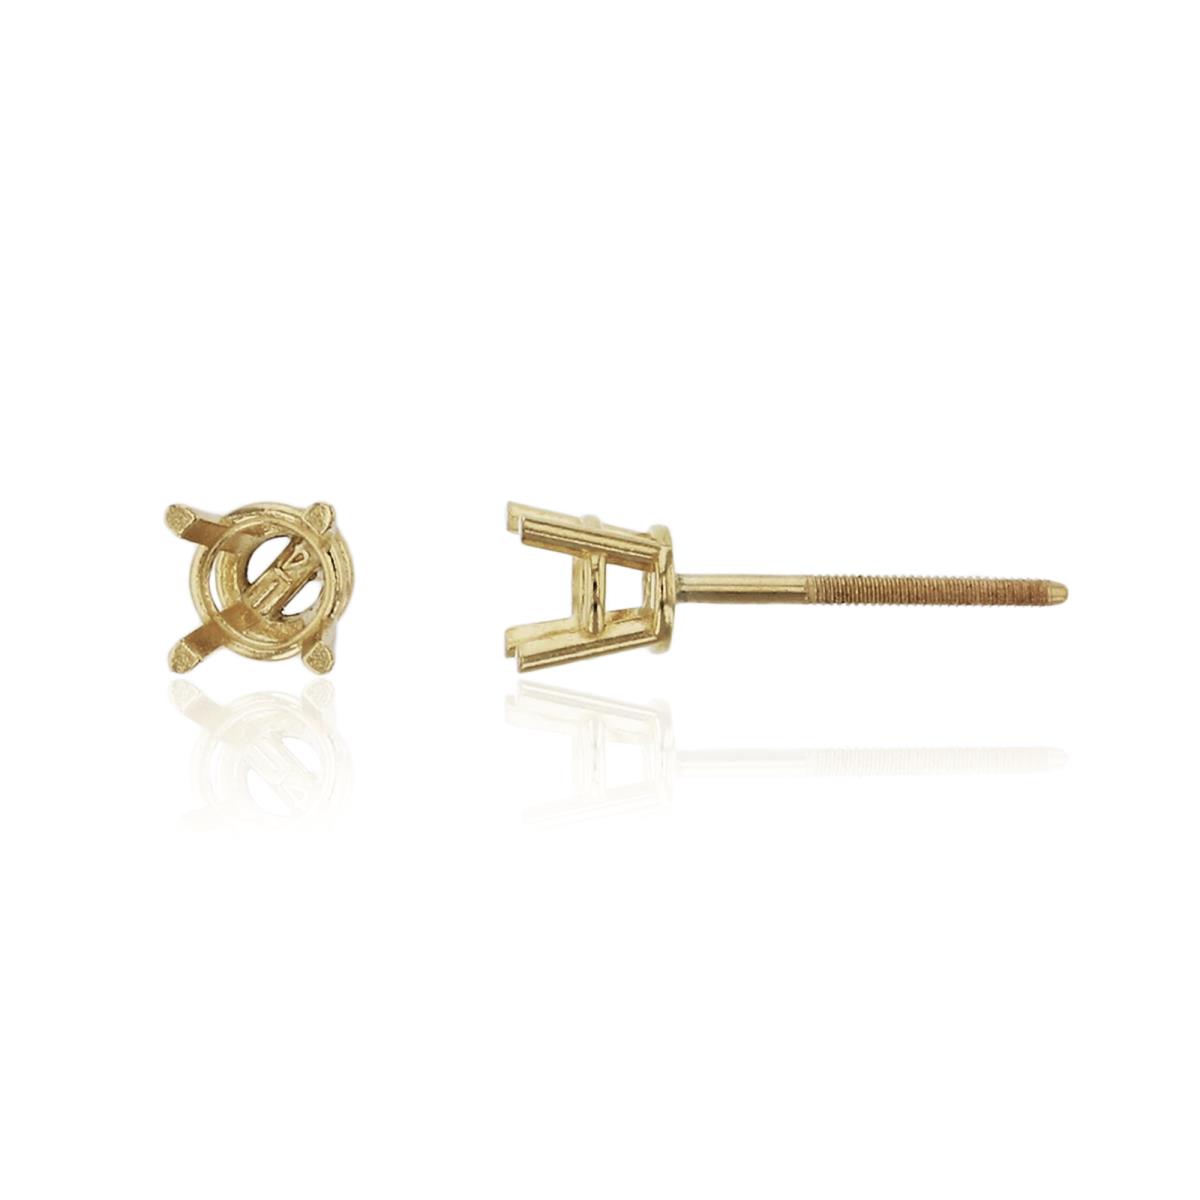 14K Yellow Gold 4mm Rd 4-Prong Casting Basket Stud Earring Finding (PC)